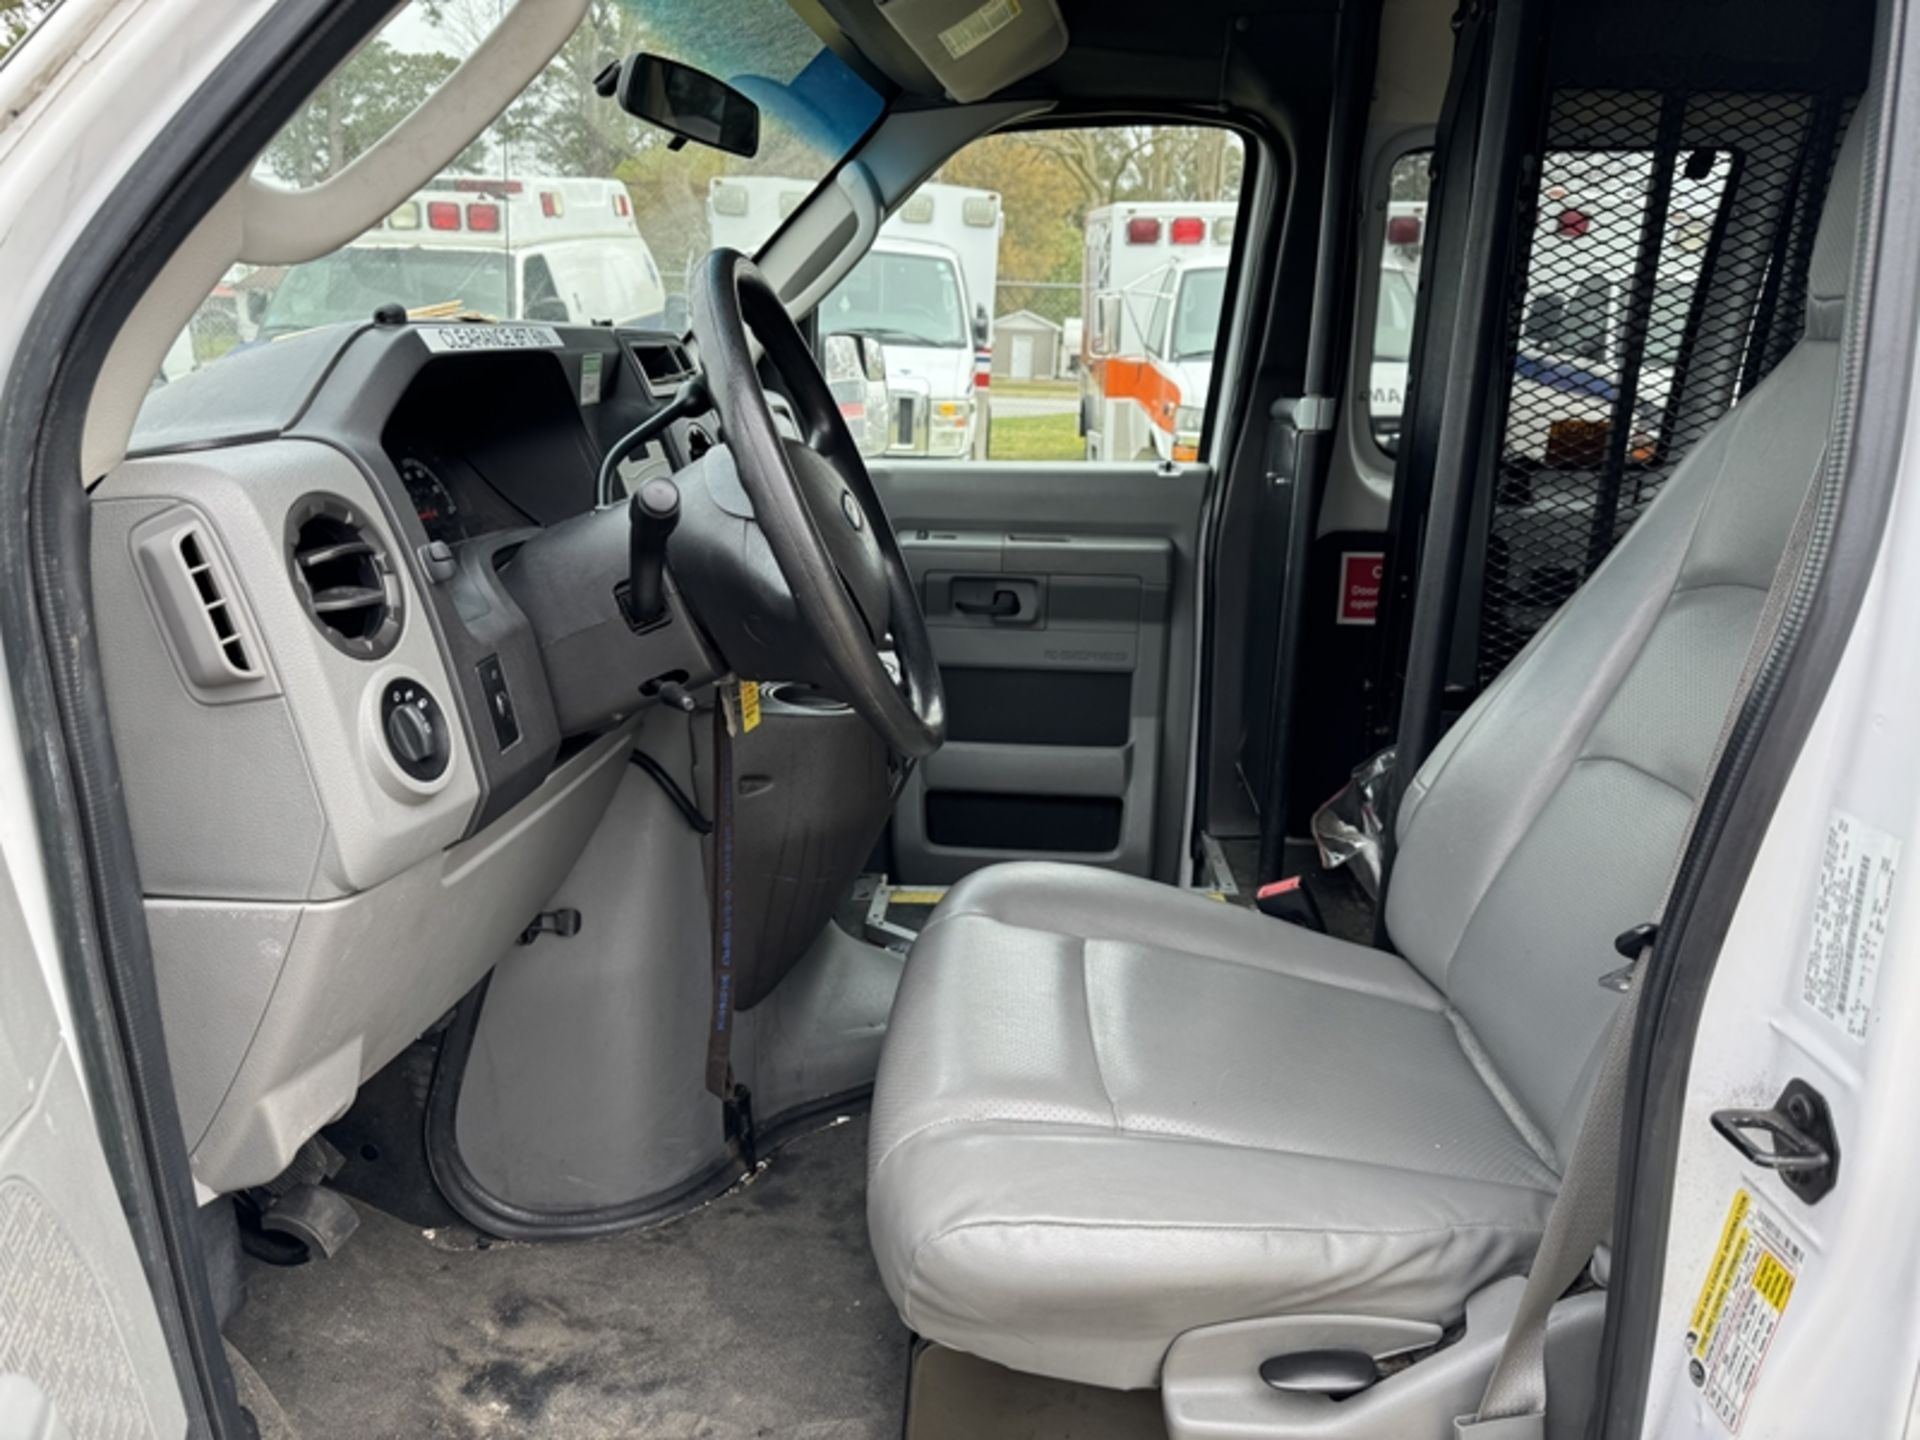 2013 FORD E-250 wheelchair van - 93,207 miles showing - 1FTNS2EW0DDB04057 - Image 4 of 6